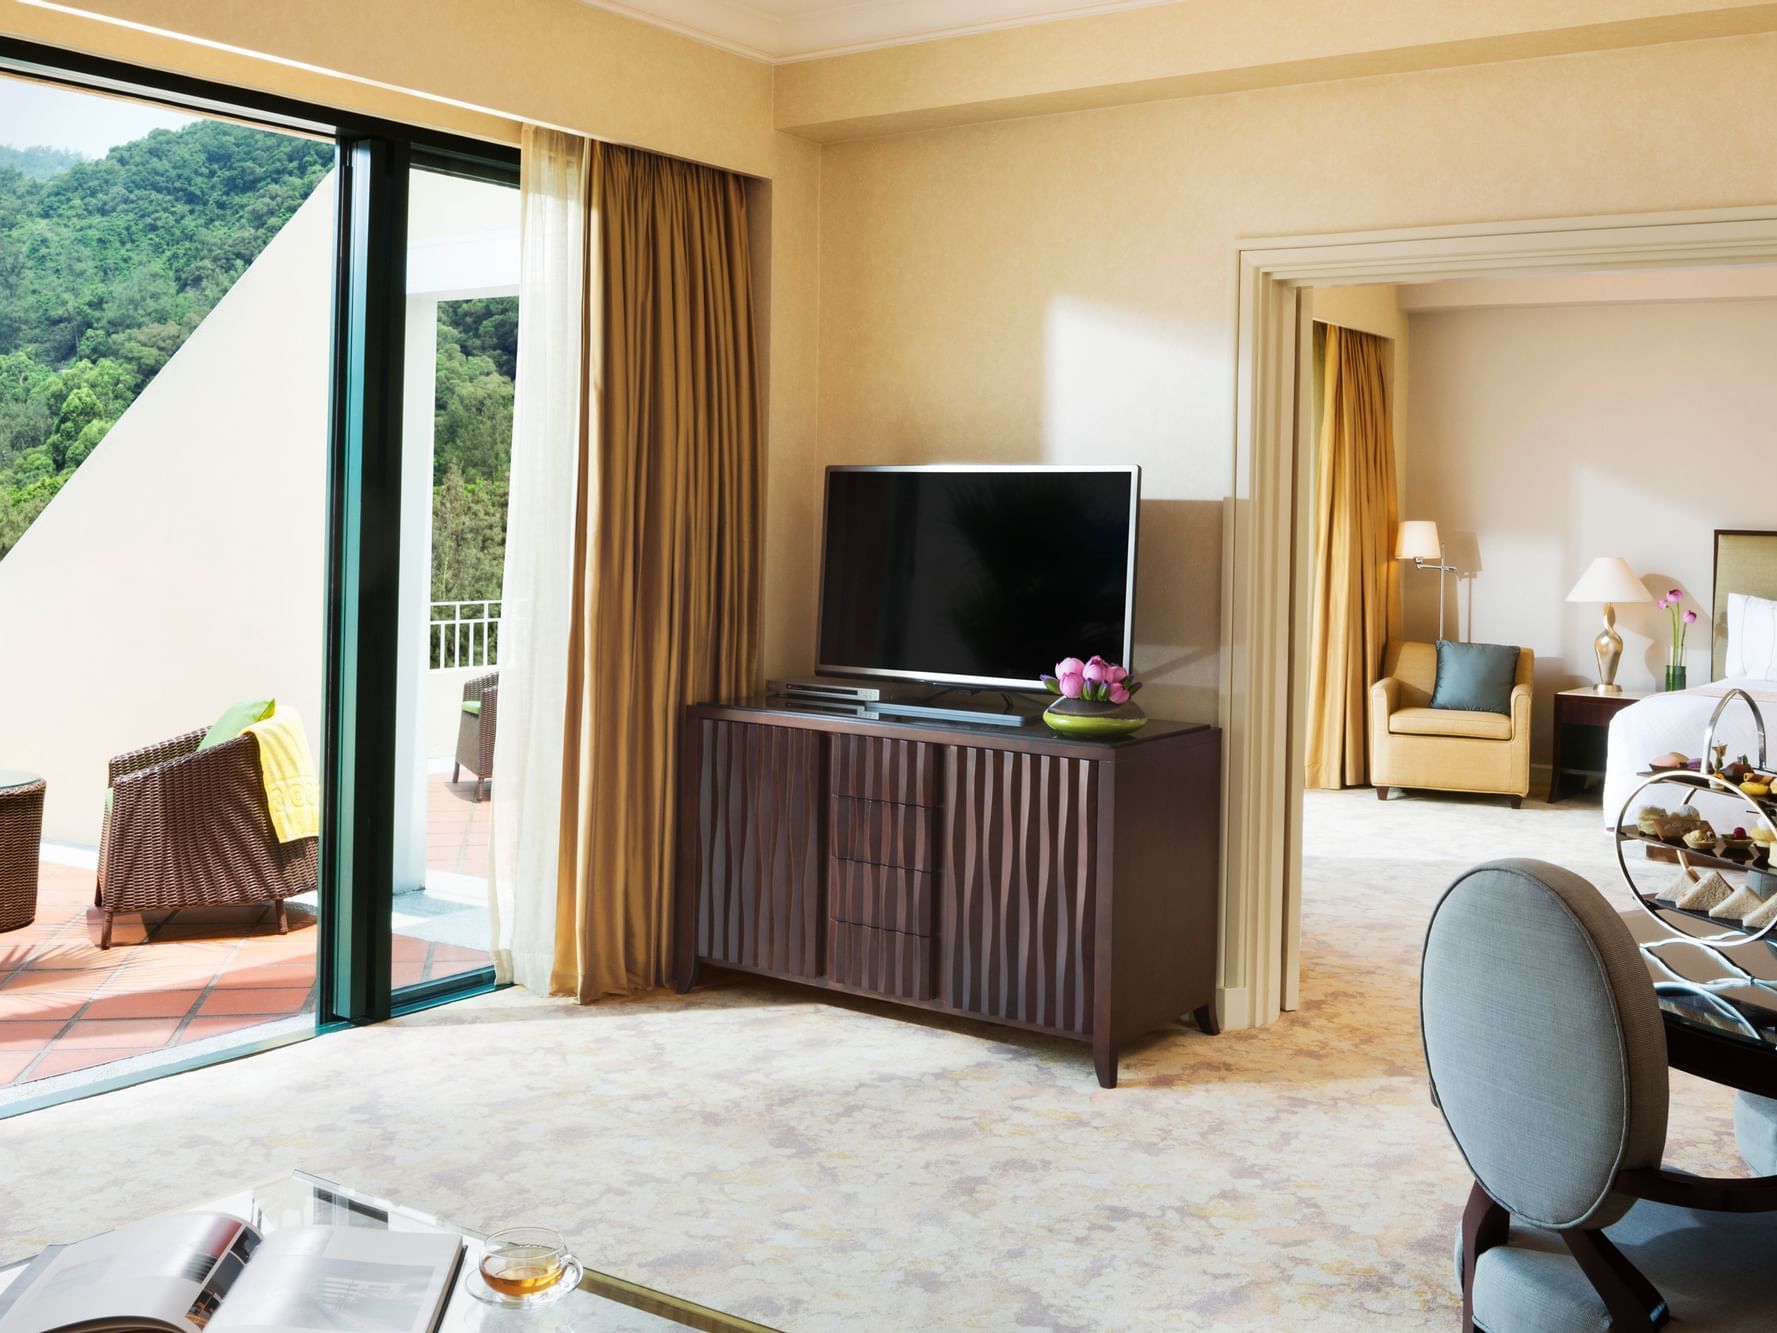 Interior of the Deluxe Suite at Grand Coloane Resort